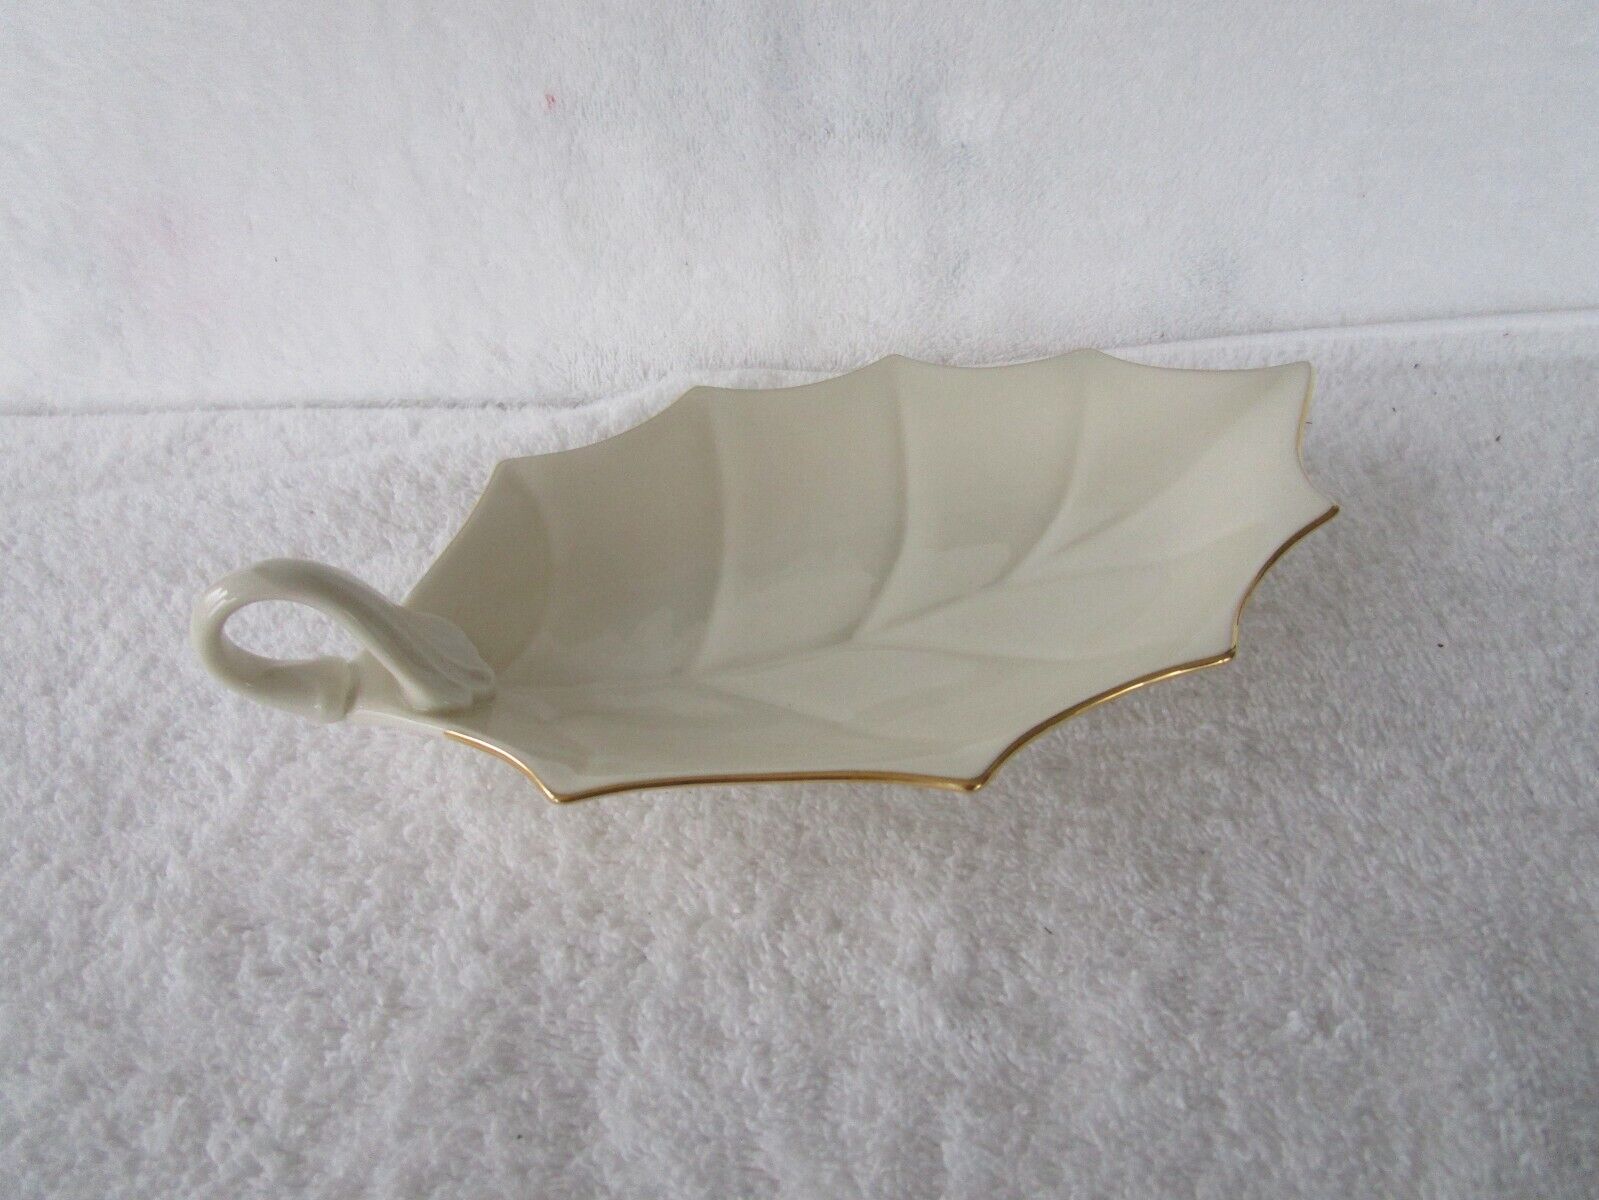 QUALITY~~Lenox USA Special~ Leaf Design Candy Bowl With Handle